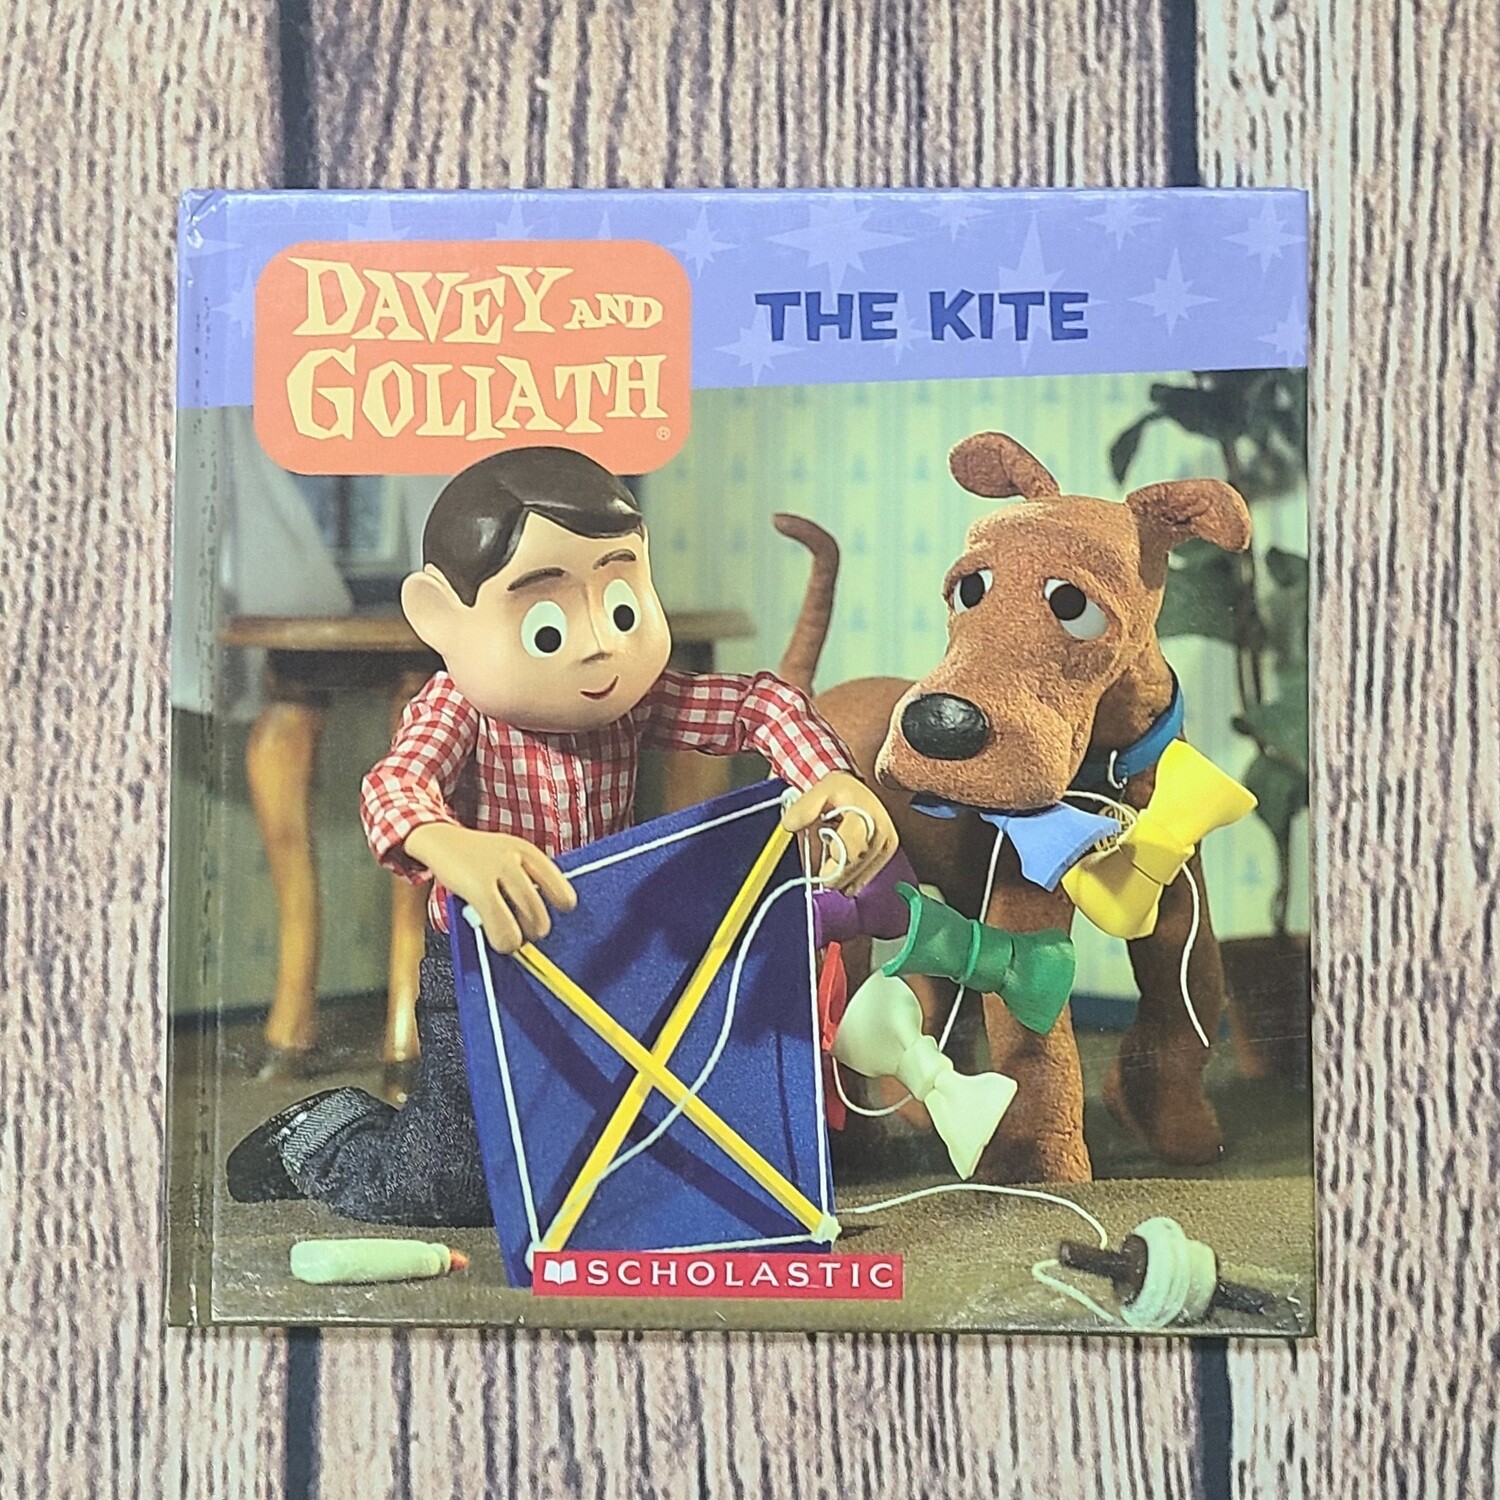 Davey and Goliath: The Kite by Sue Wright